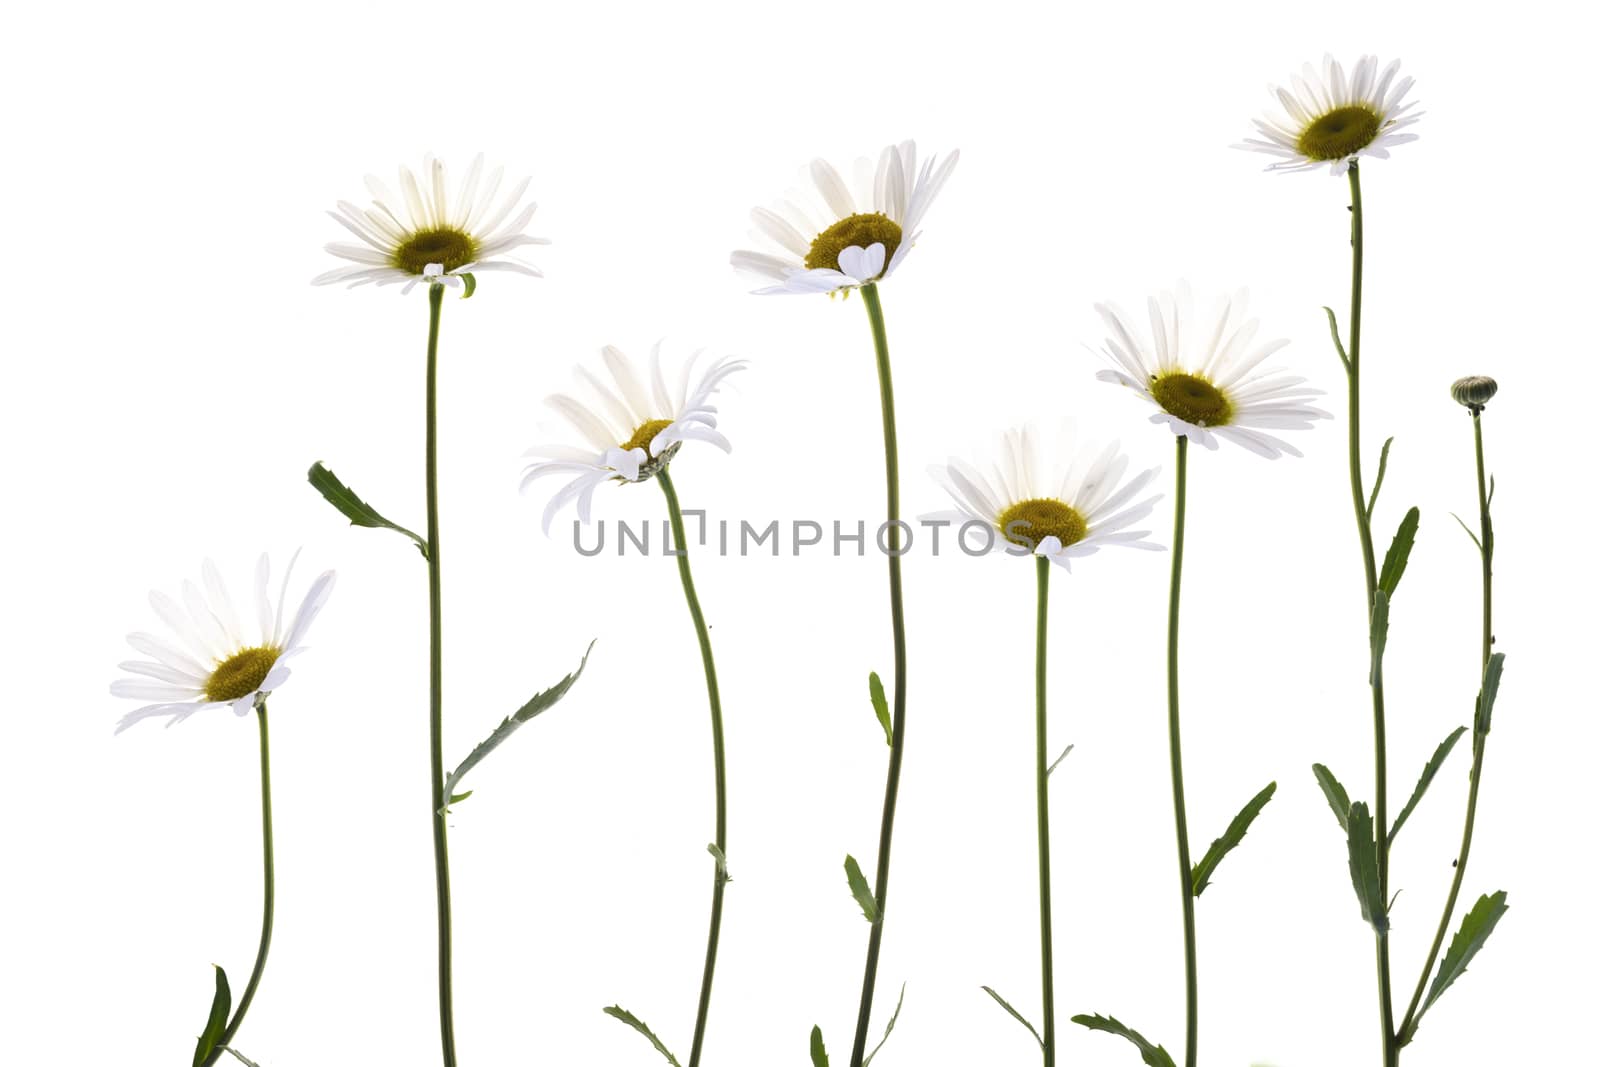 Various daisy flowers isolated on white background by sashokddt